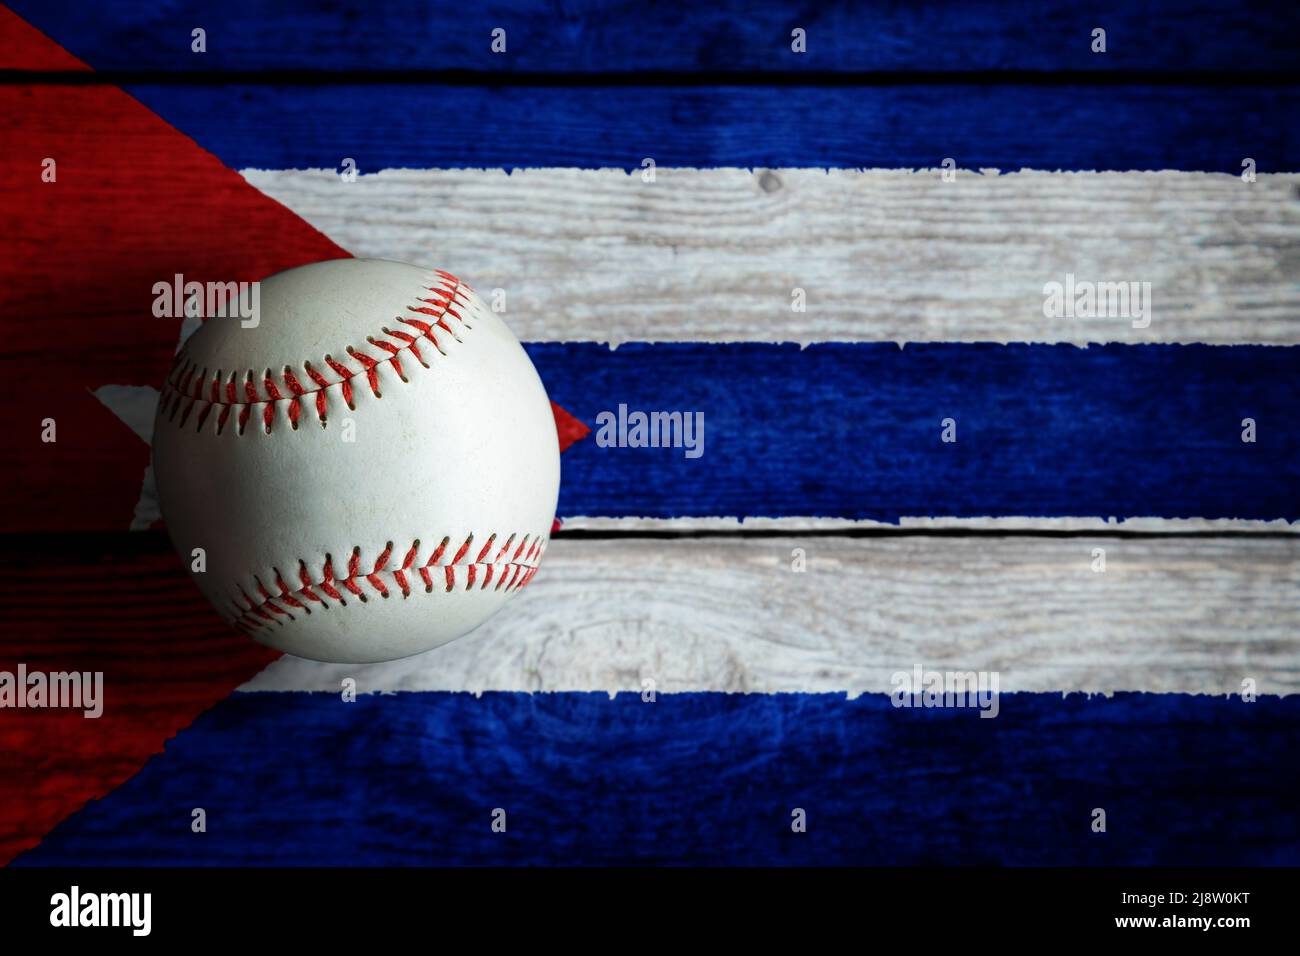 Leather baseball on rustic wooden background painted with Cuban flag with copy space. Cuba is one of the top baseball nations in the world. Stock Photo